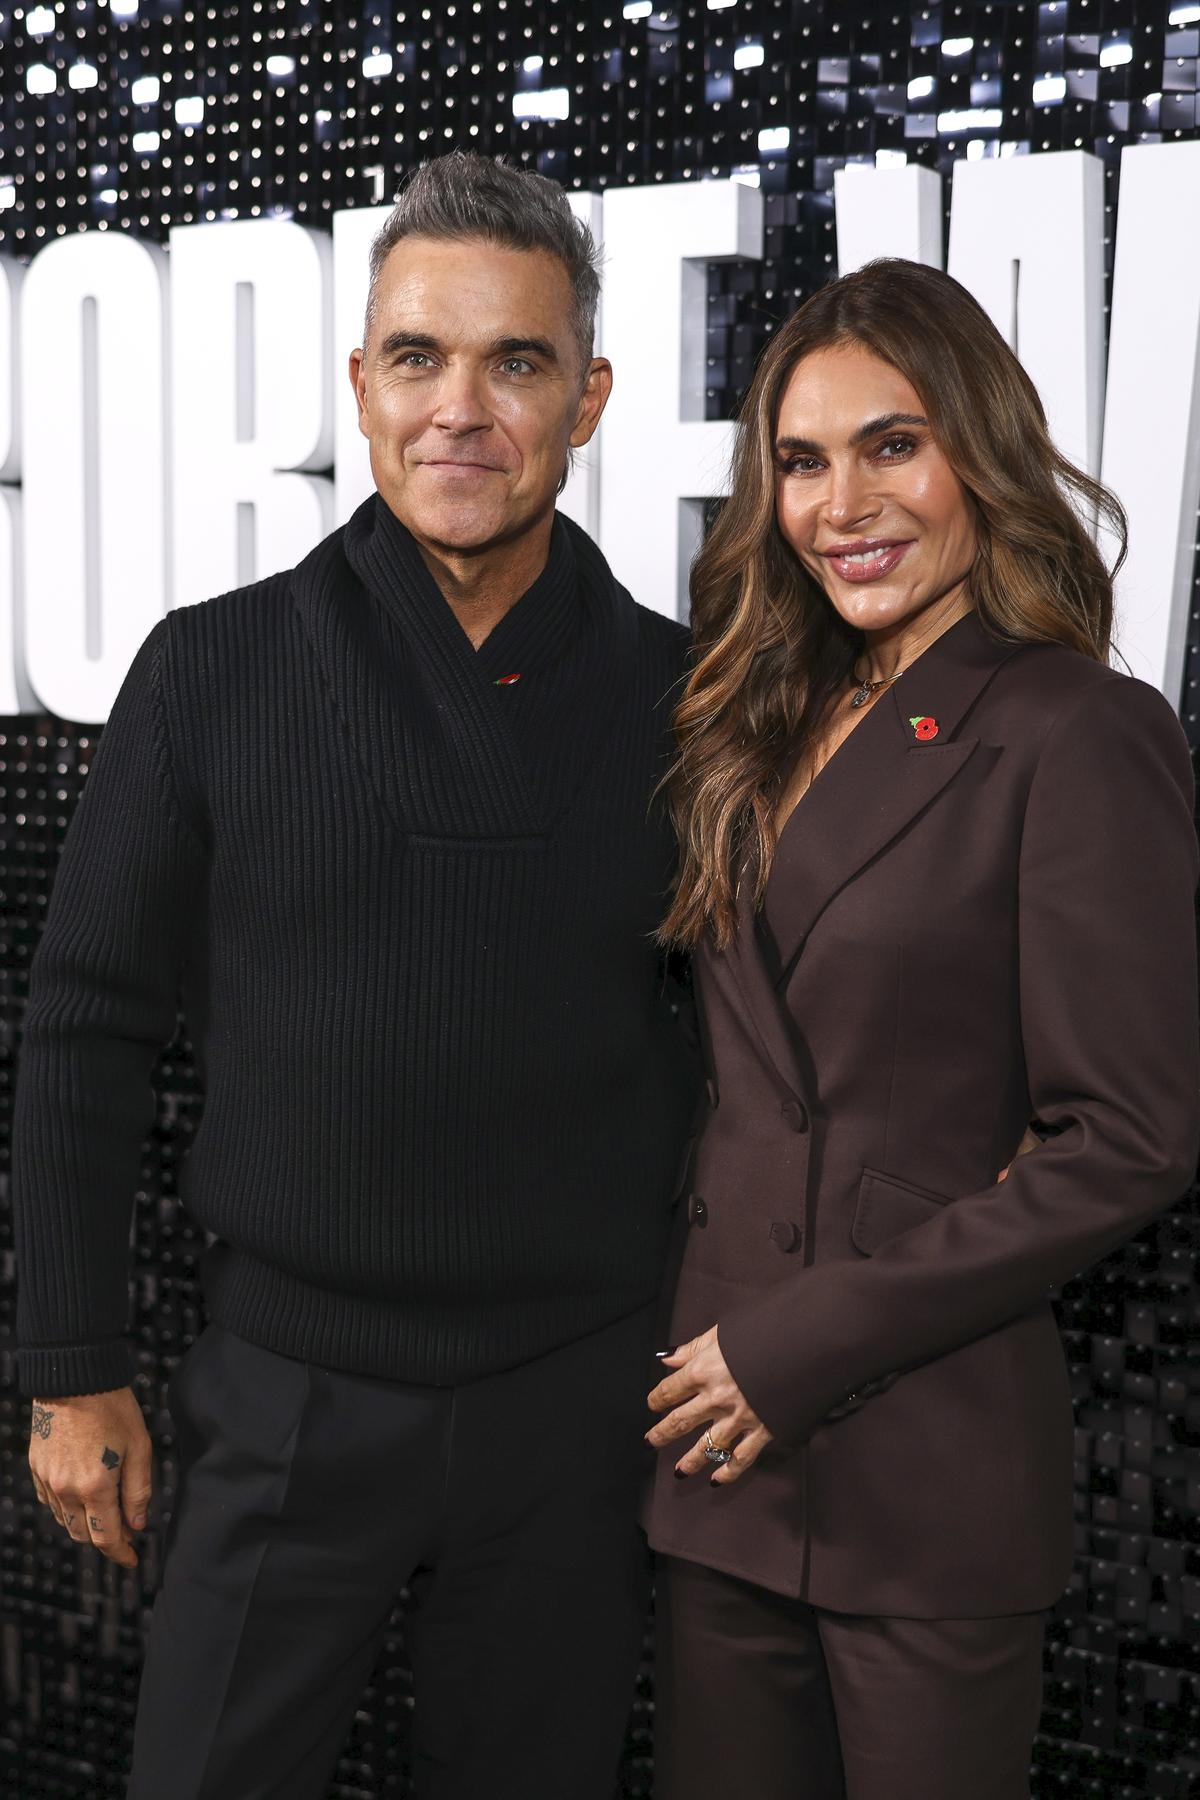 Robbie Williams, left, and Ayda Field pose for photographers upon arrival at the premiere for the ‘Robbie Williams’ documentary